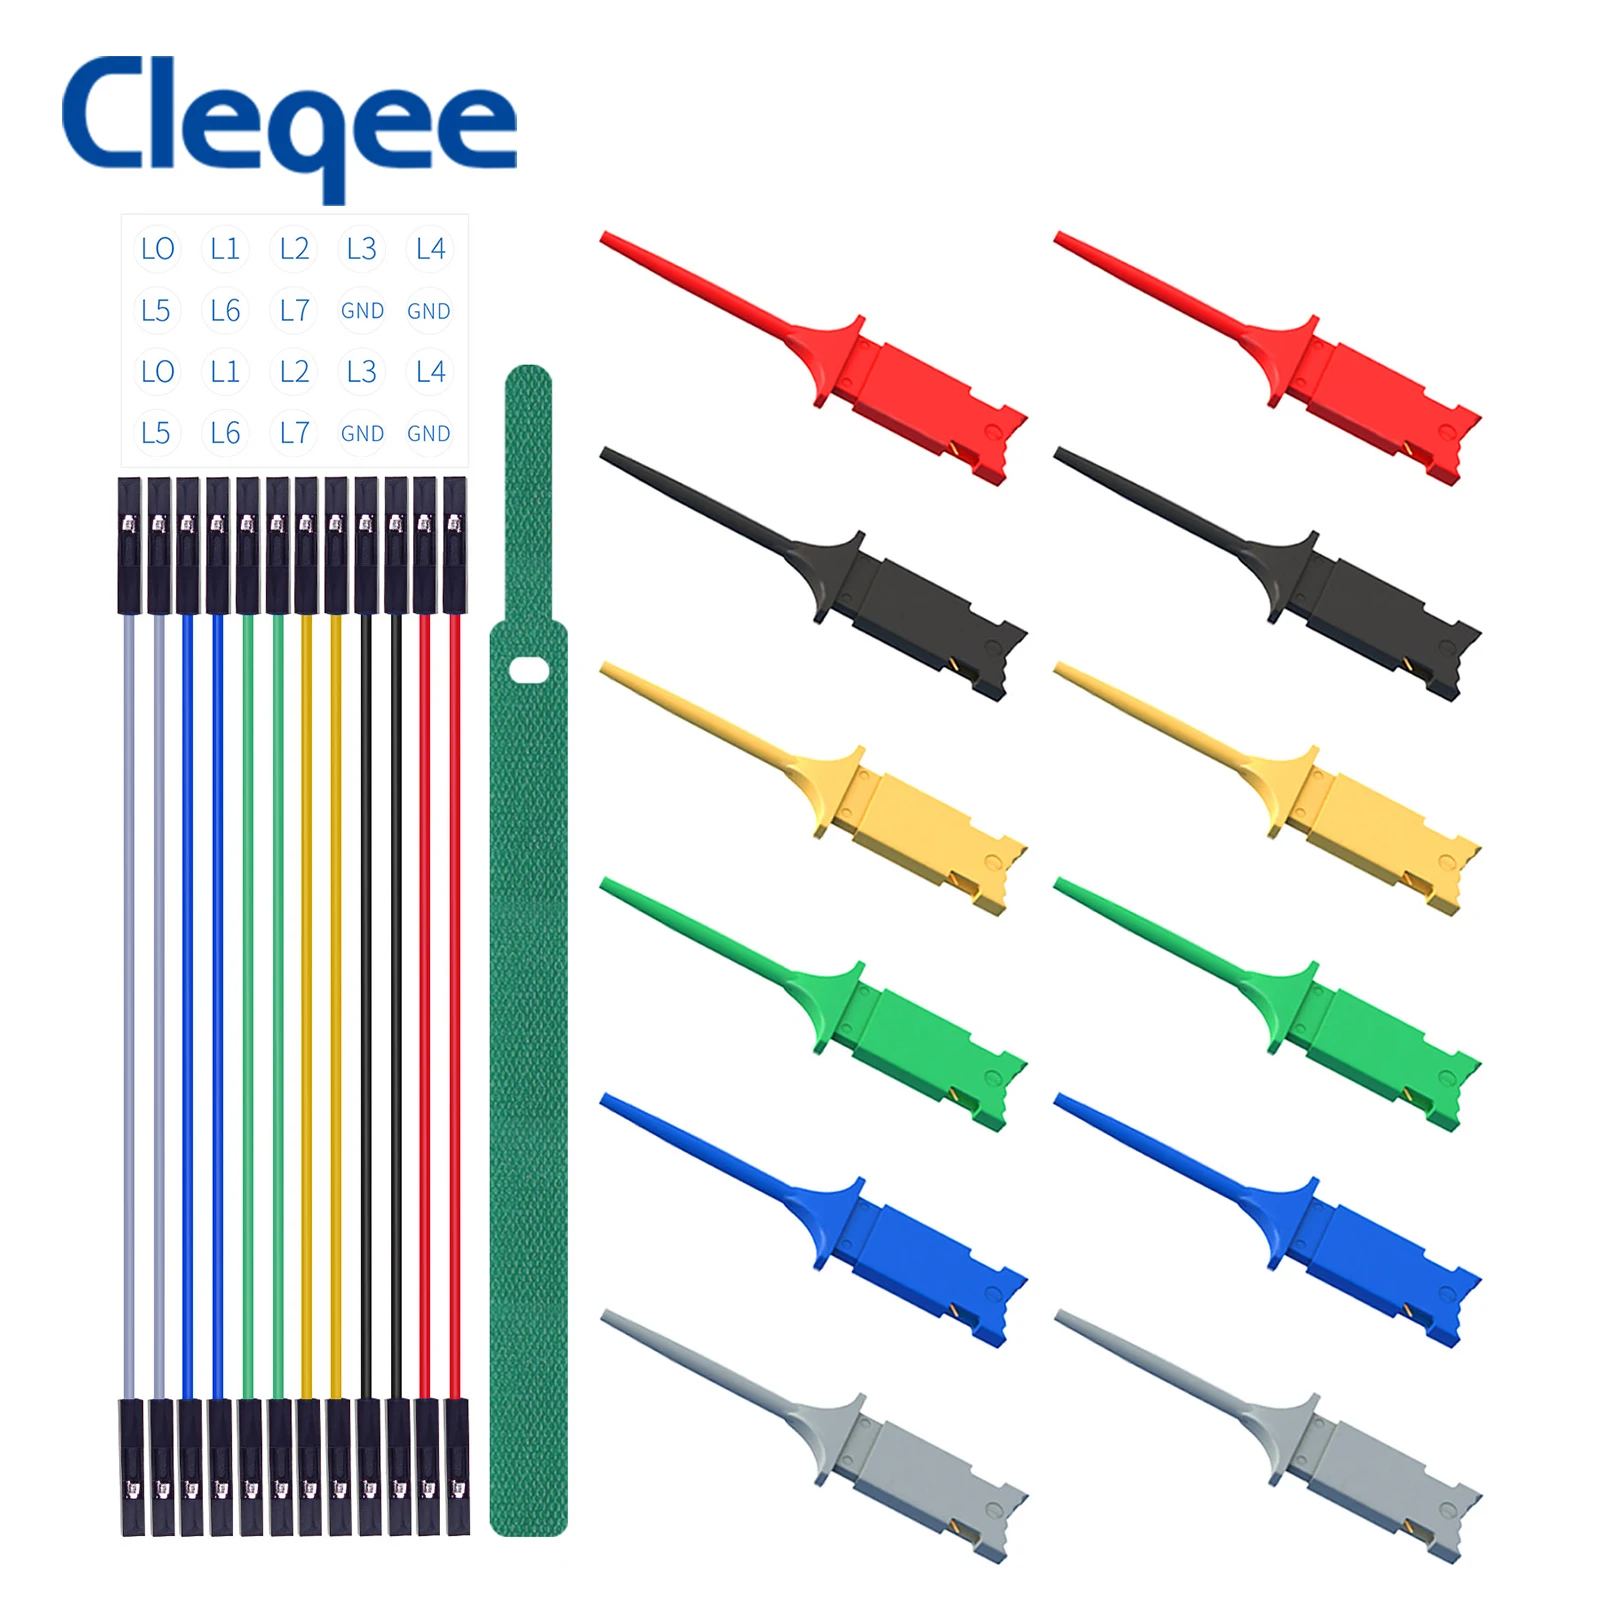 Cleqee Mini Grabber SMD IC Test Hook Clips with Silicone Jumper Wires Test Leads Kit for Electrical Oscilloscope Testing 6Colors